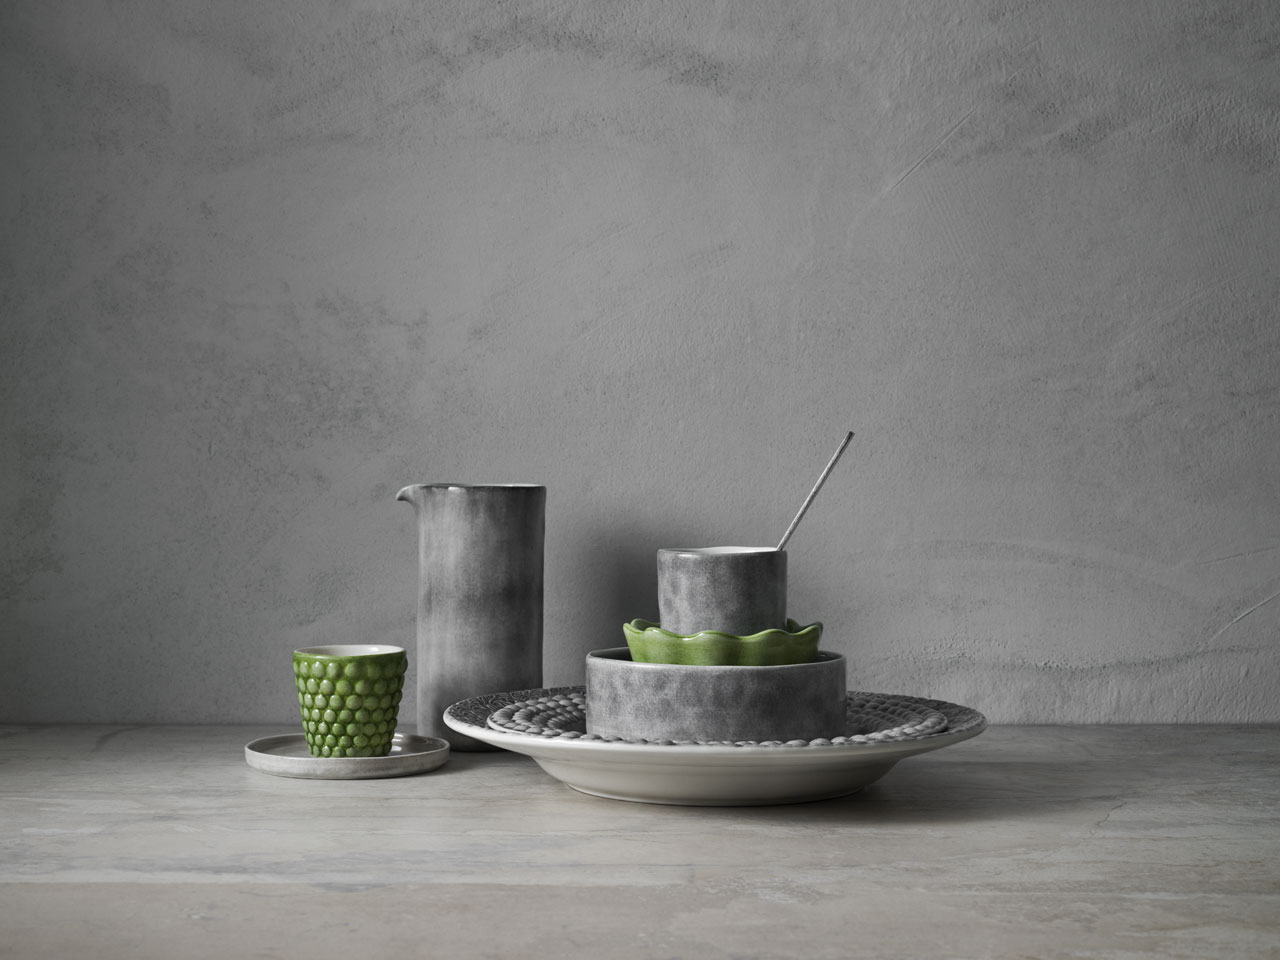 Mateus ceramic tableware collections combined together with the new "Mateus meets Sam Baron meets Yatzer" .Styling by Lotta Agaton.Photo by Fabian Björnstjerna.